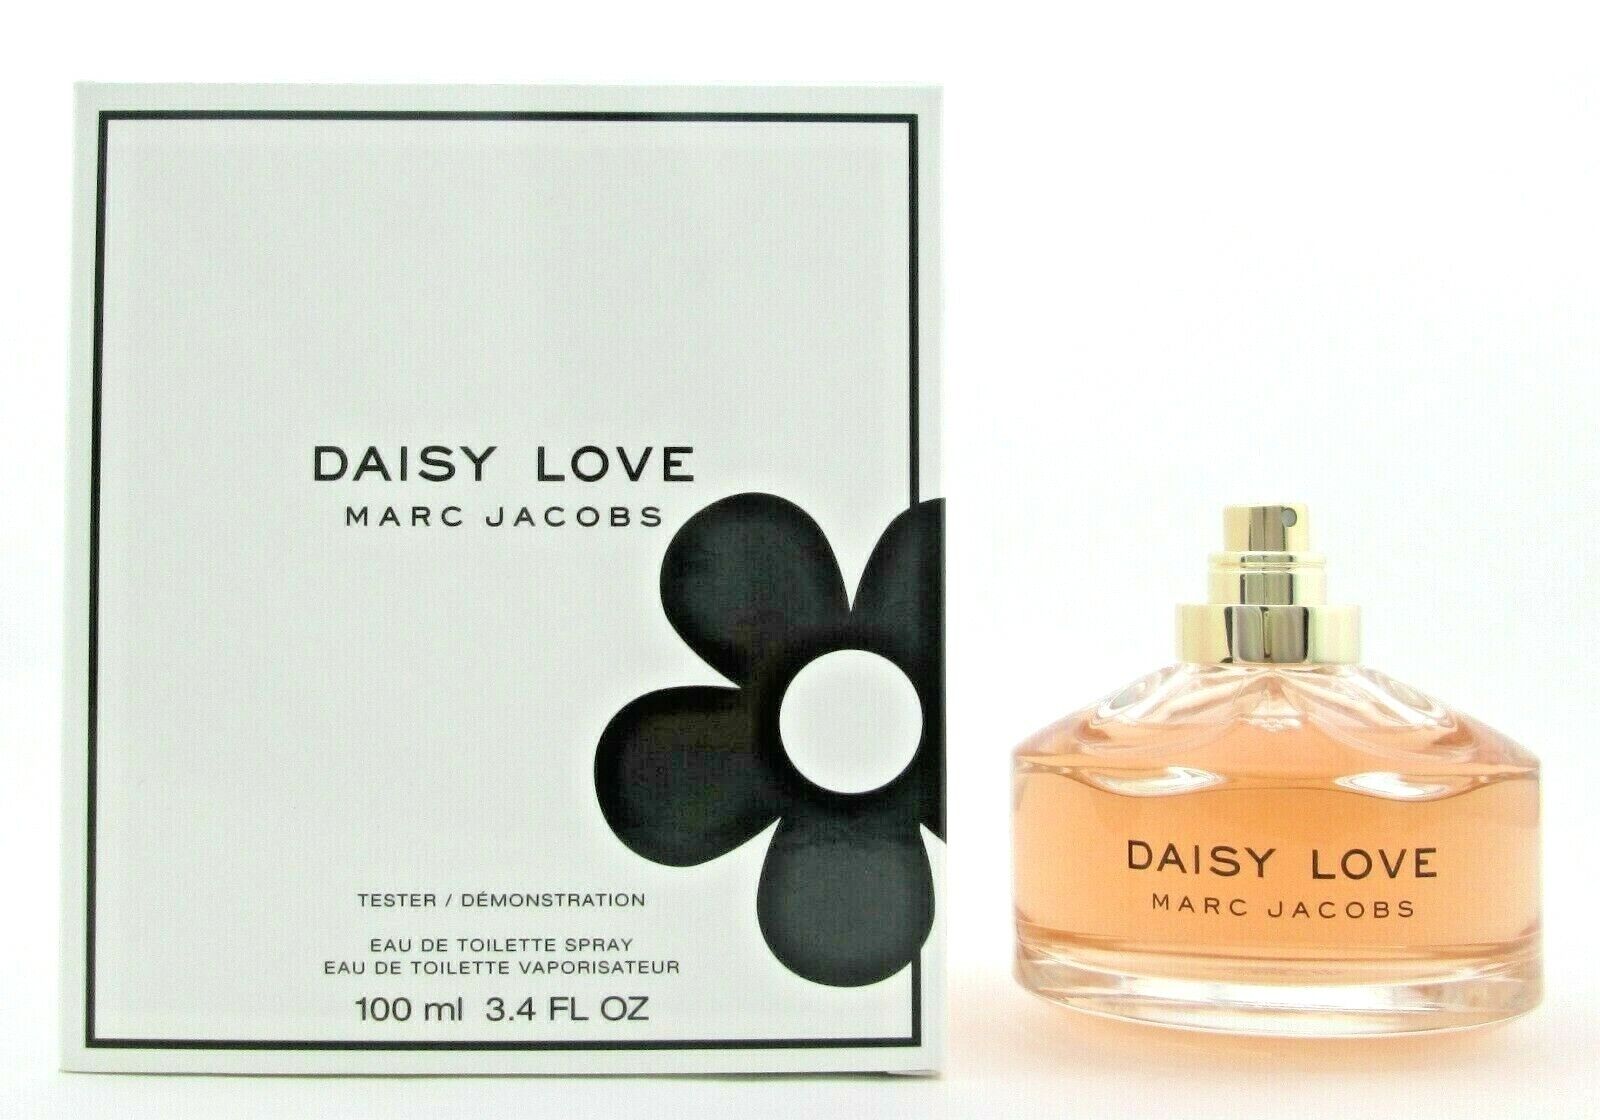 Daisy Love by Marc Jacobs 3.4 oz./100 ml. EDT Spray for Women New Tester NO TOP